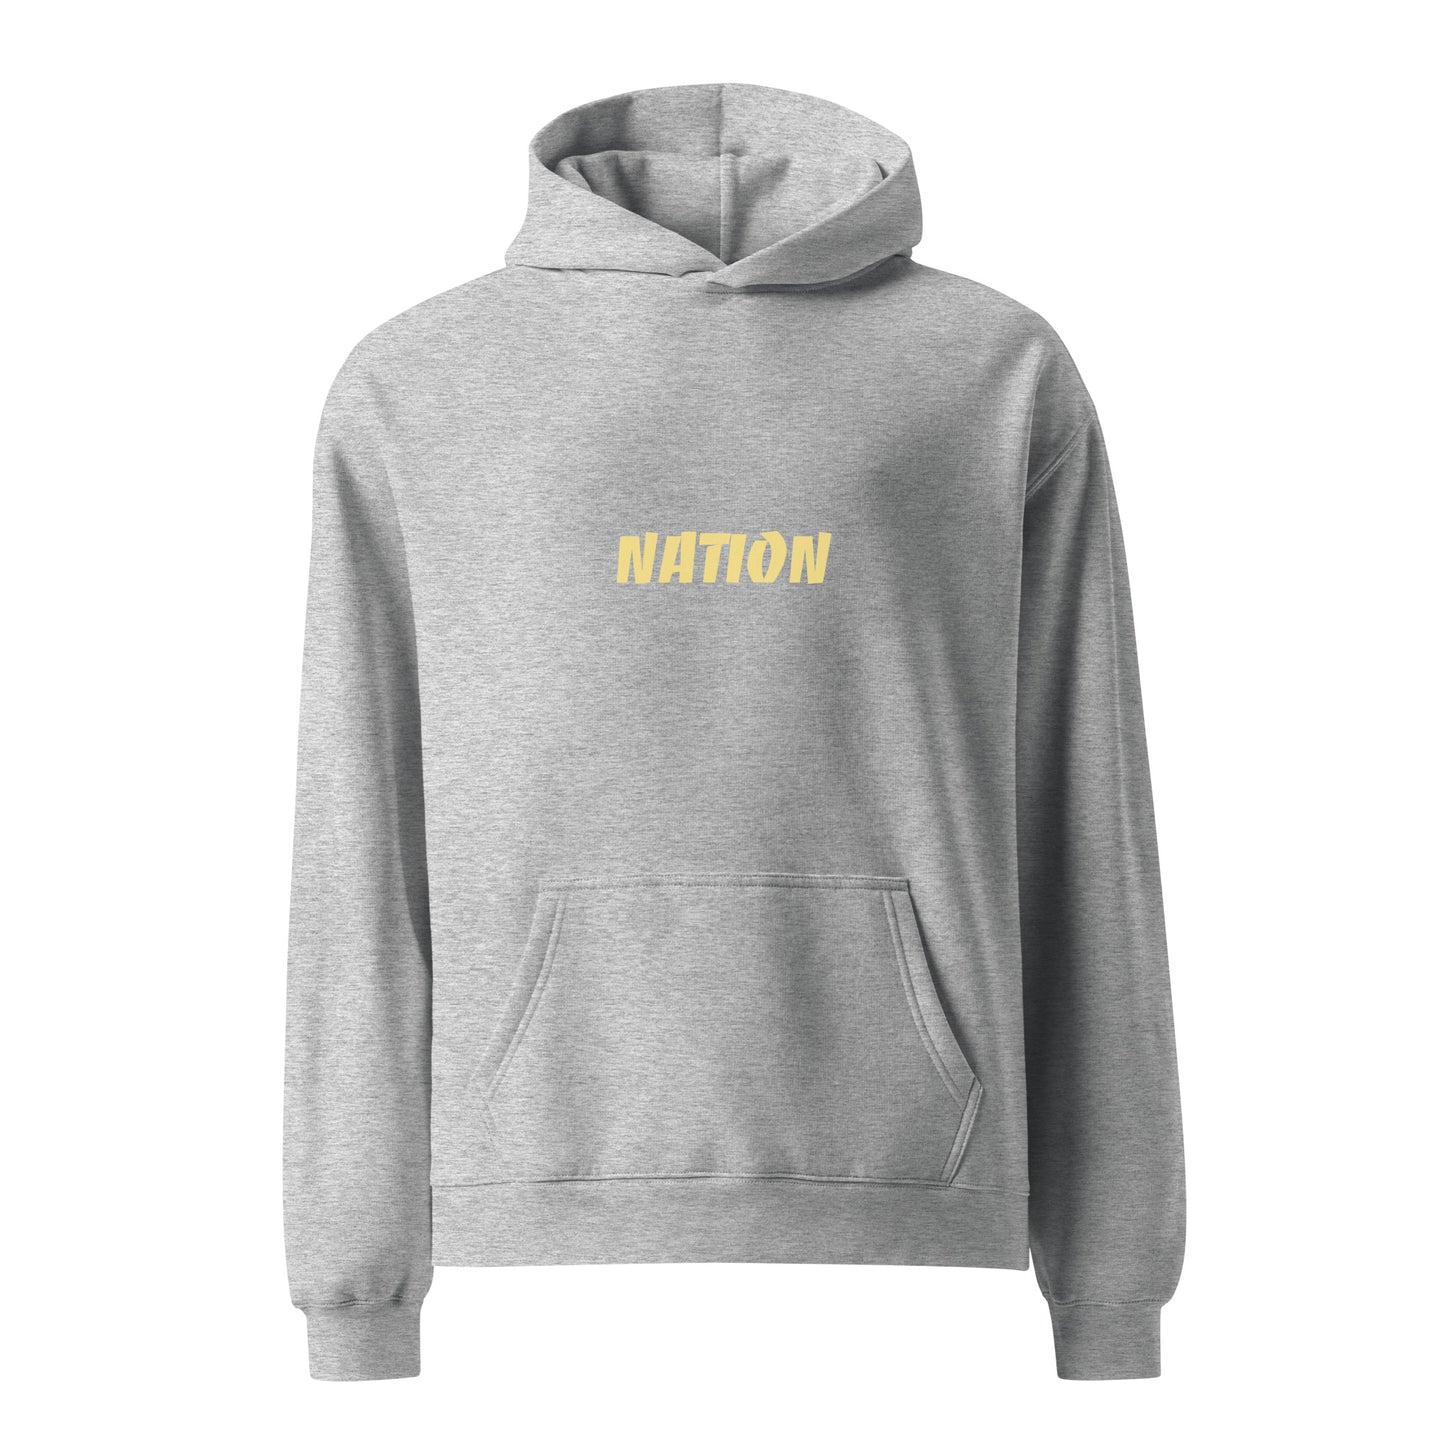 Nation oversized hoodie